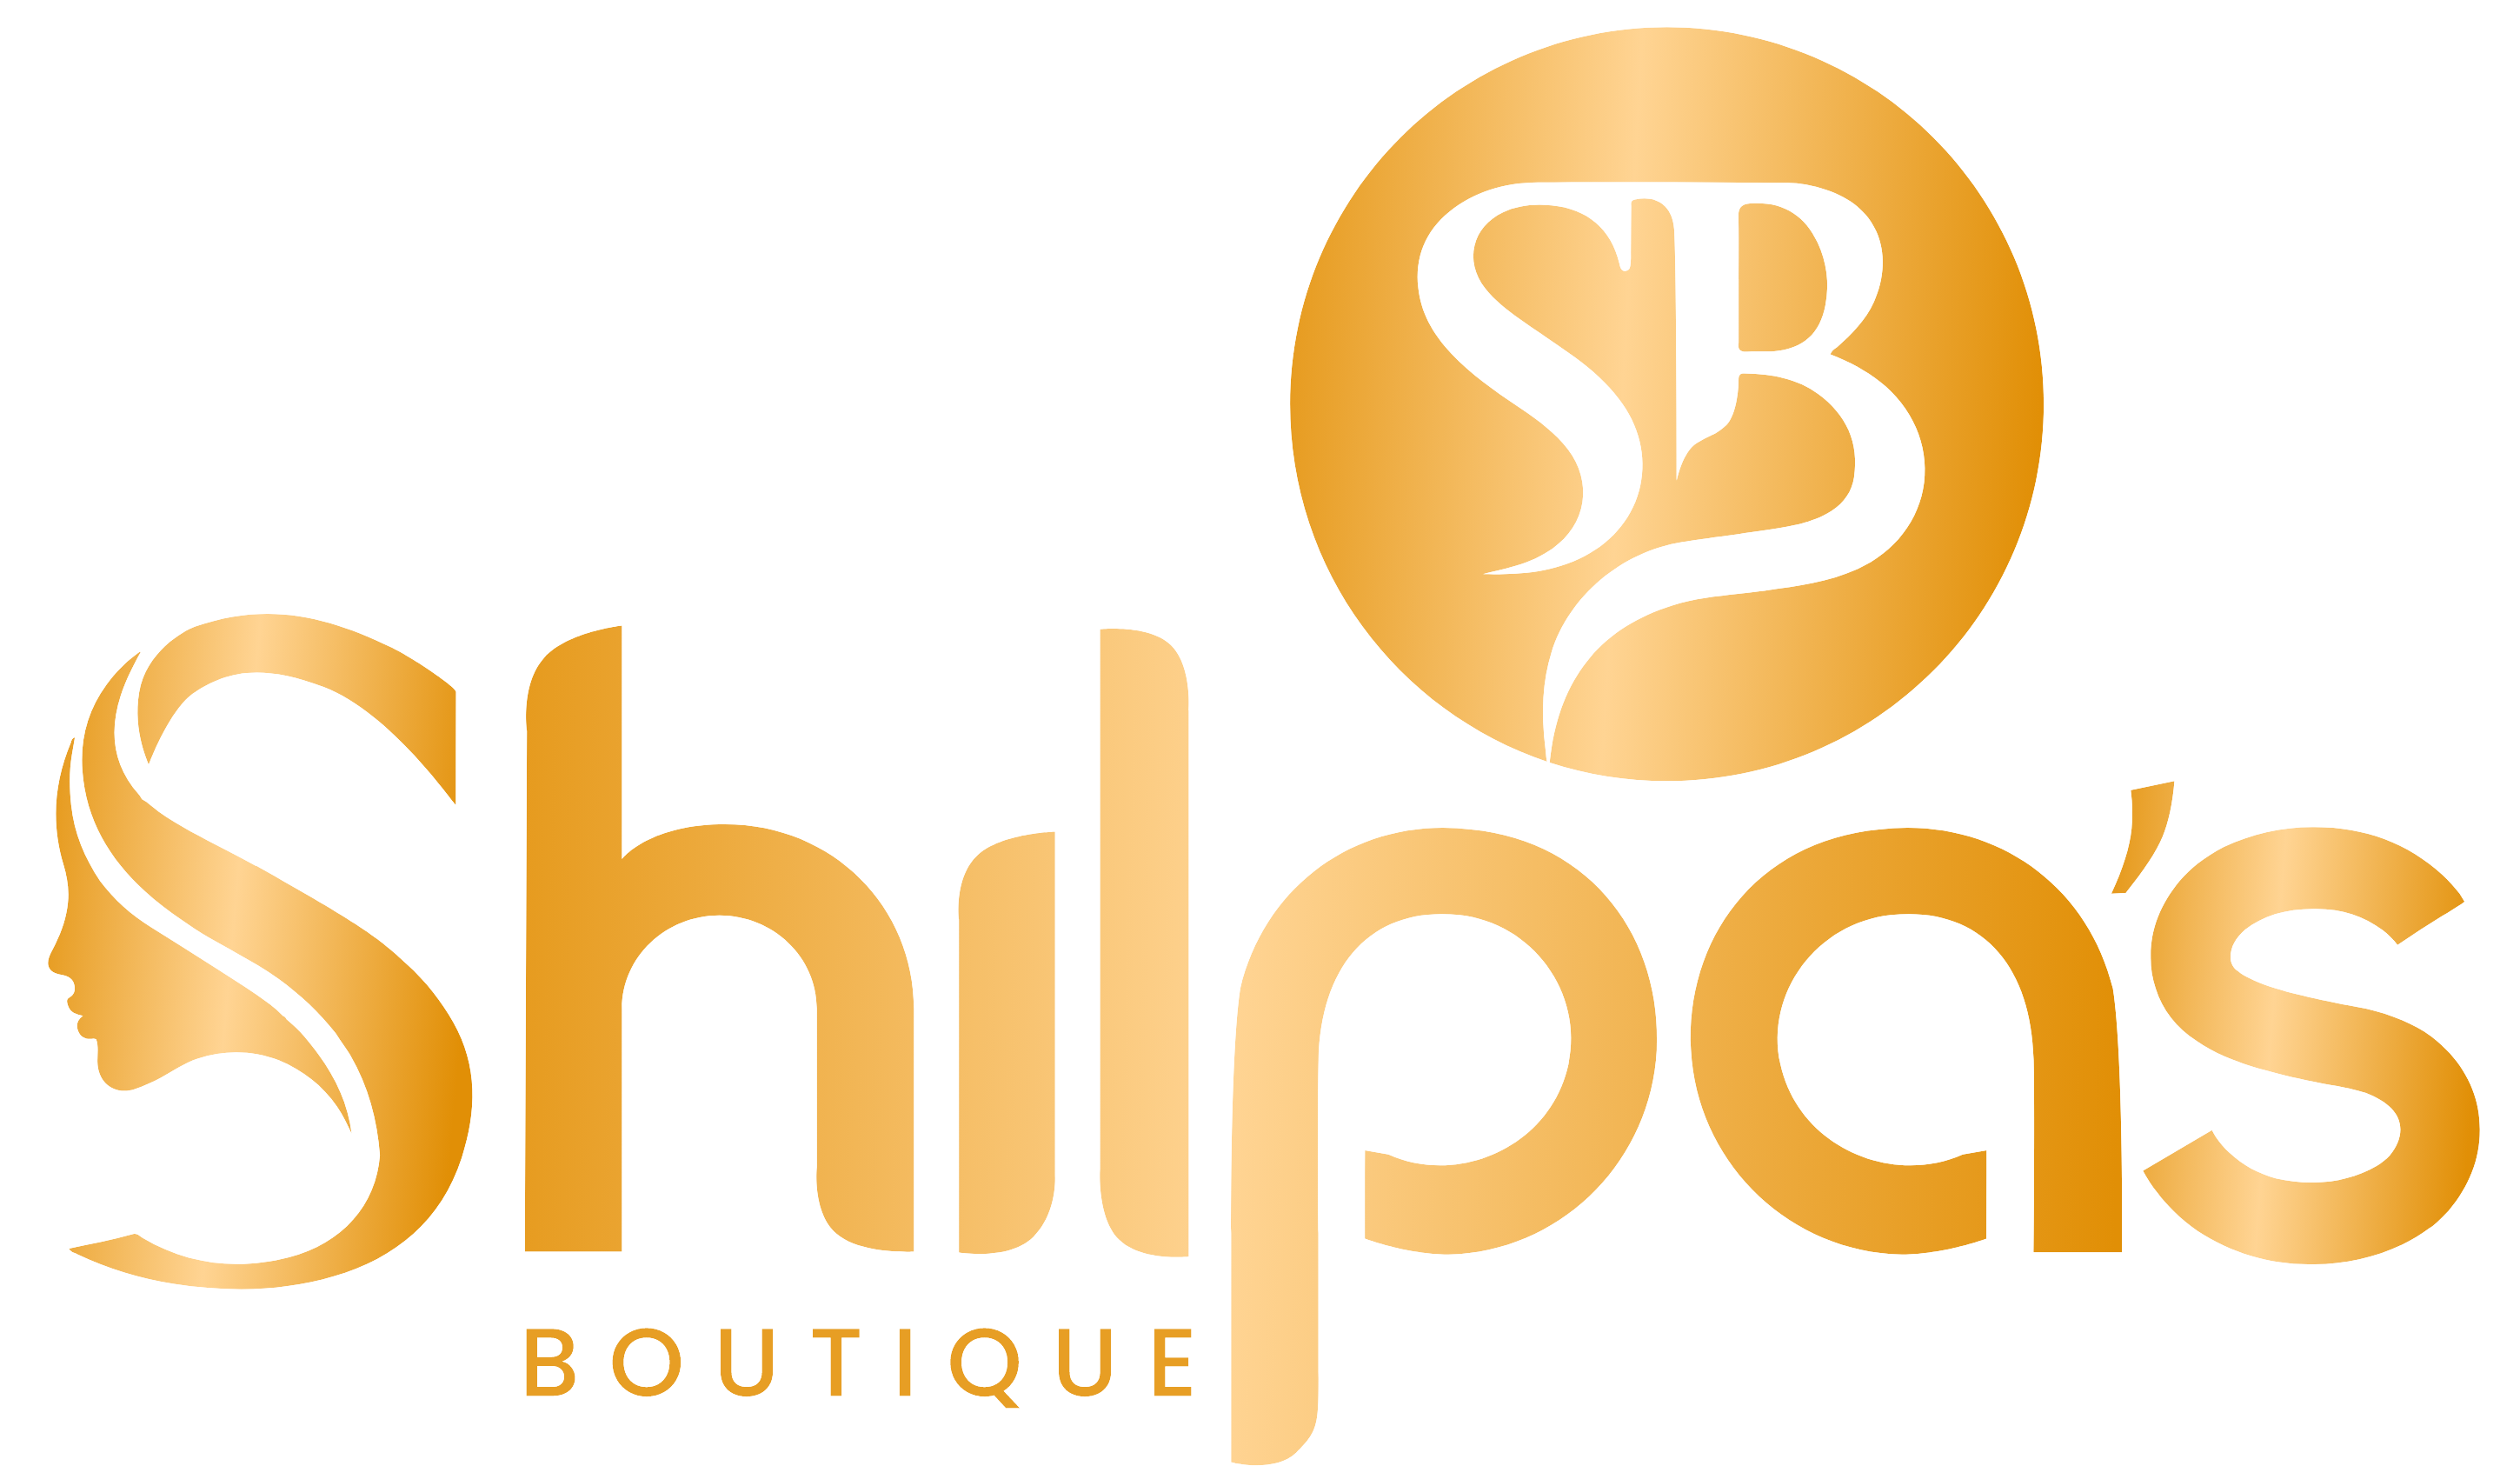 Elegance in Every Thread, Shilpa's Boutique – Your Destination for Indian Traditional Attire.